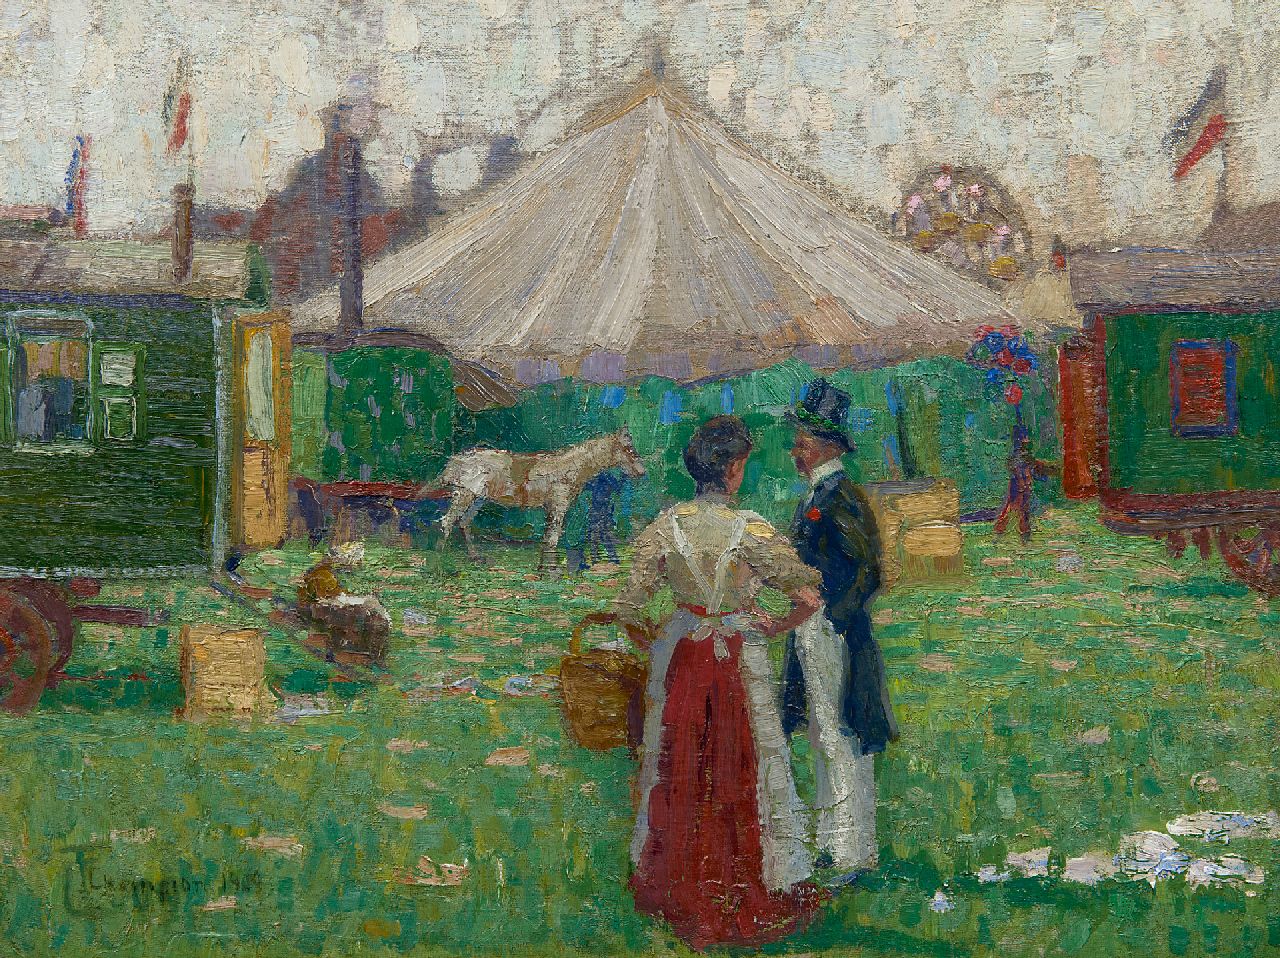 Champion T.  | Theo Champion, At the fairground, oil on canvas laid down on board 44.6 x 58.3 cm, signed l.l. and dated 1909